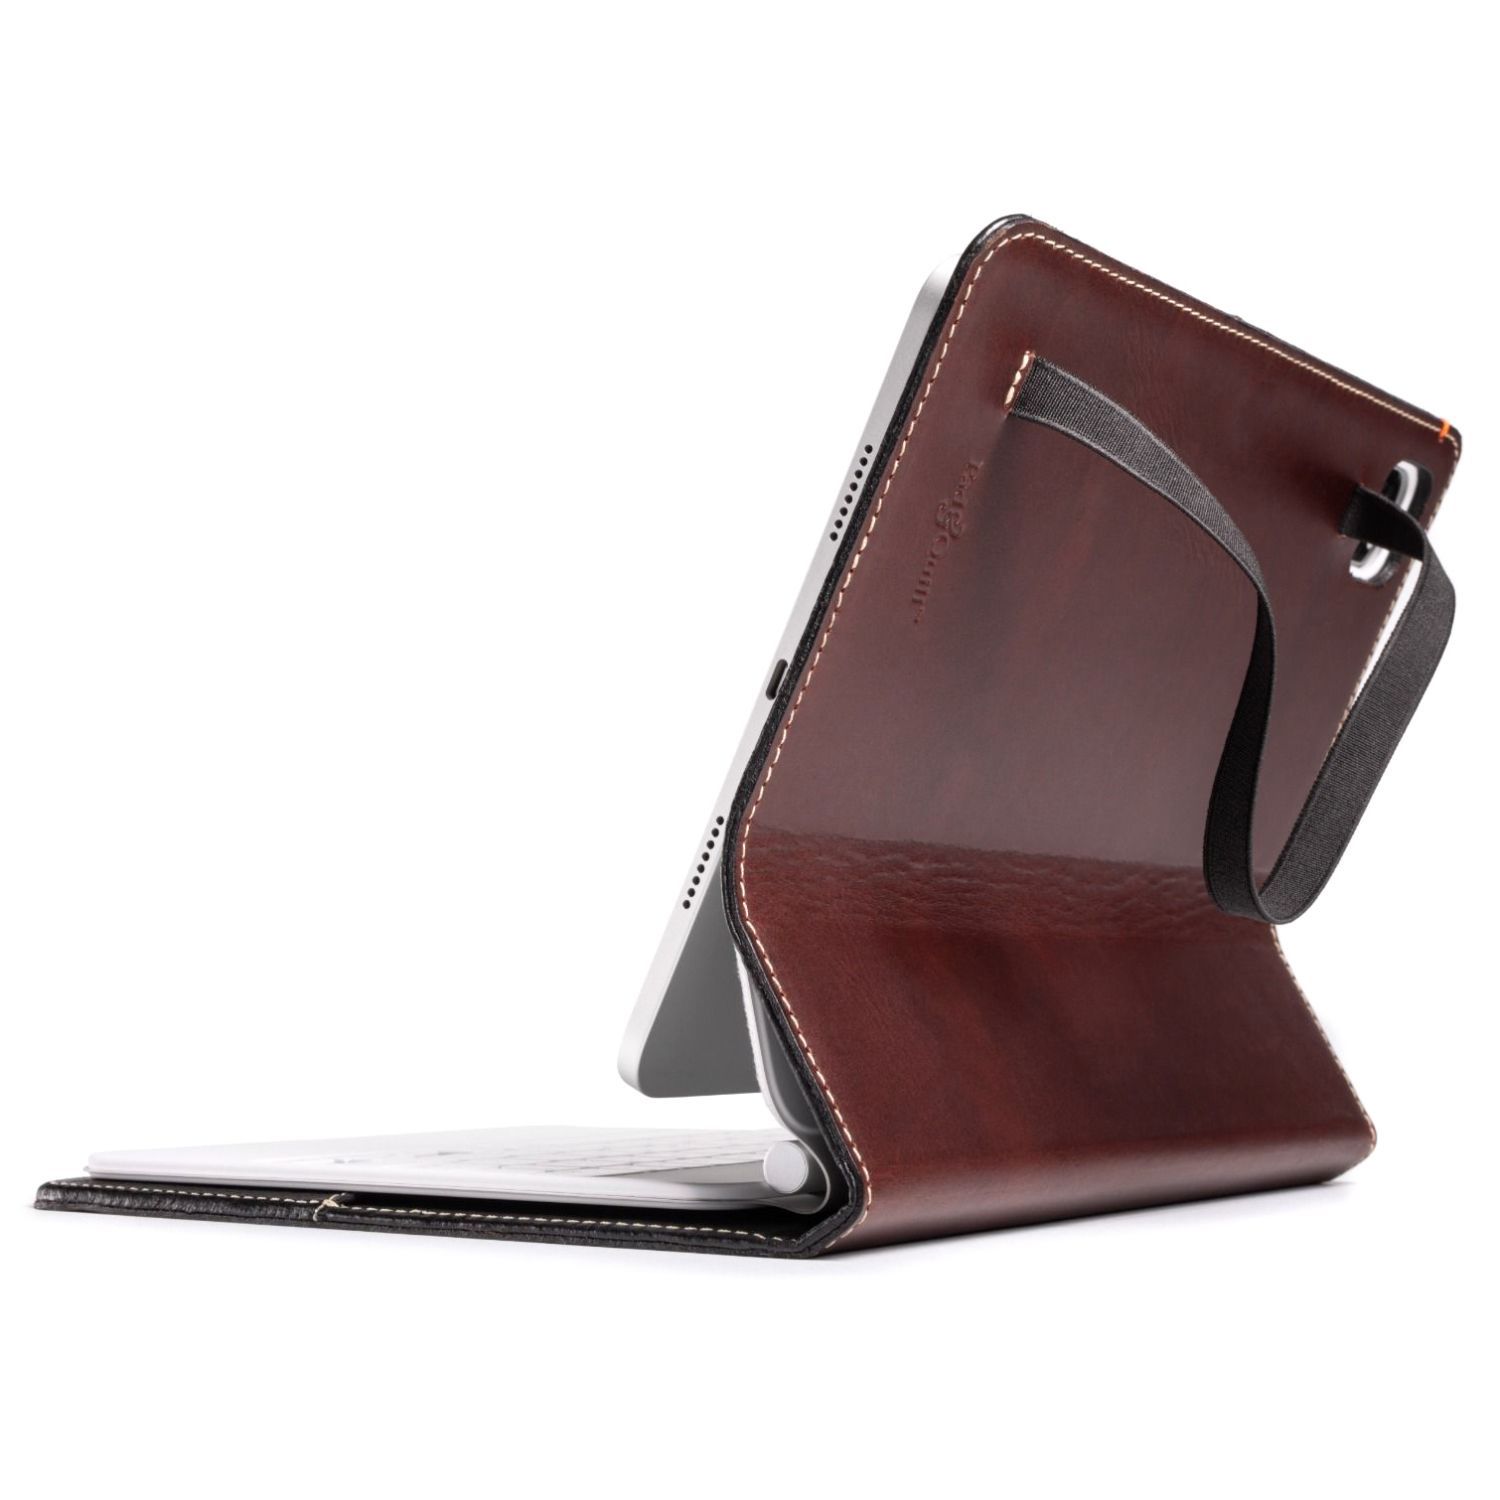 Oxford Magic Leather Case for iPad Air and iPad Pro (11-Inch)